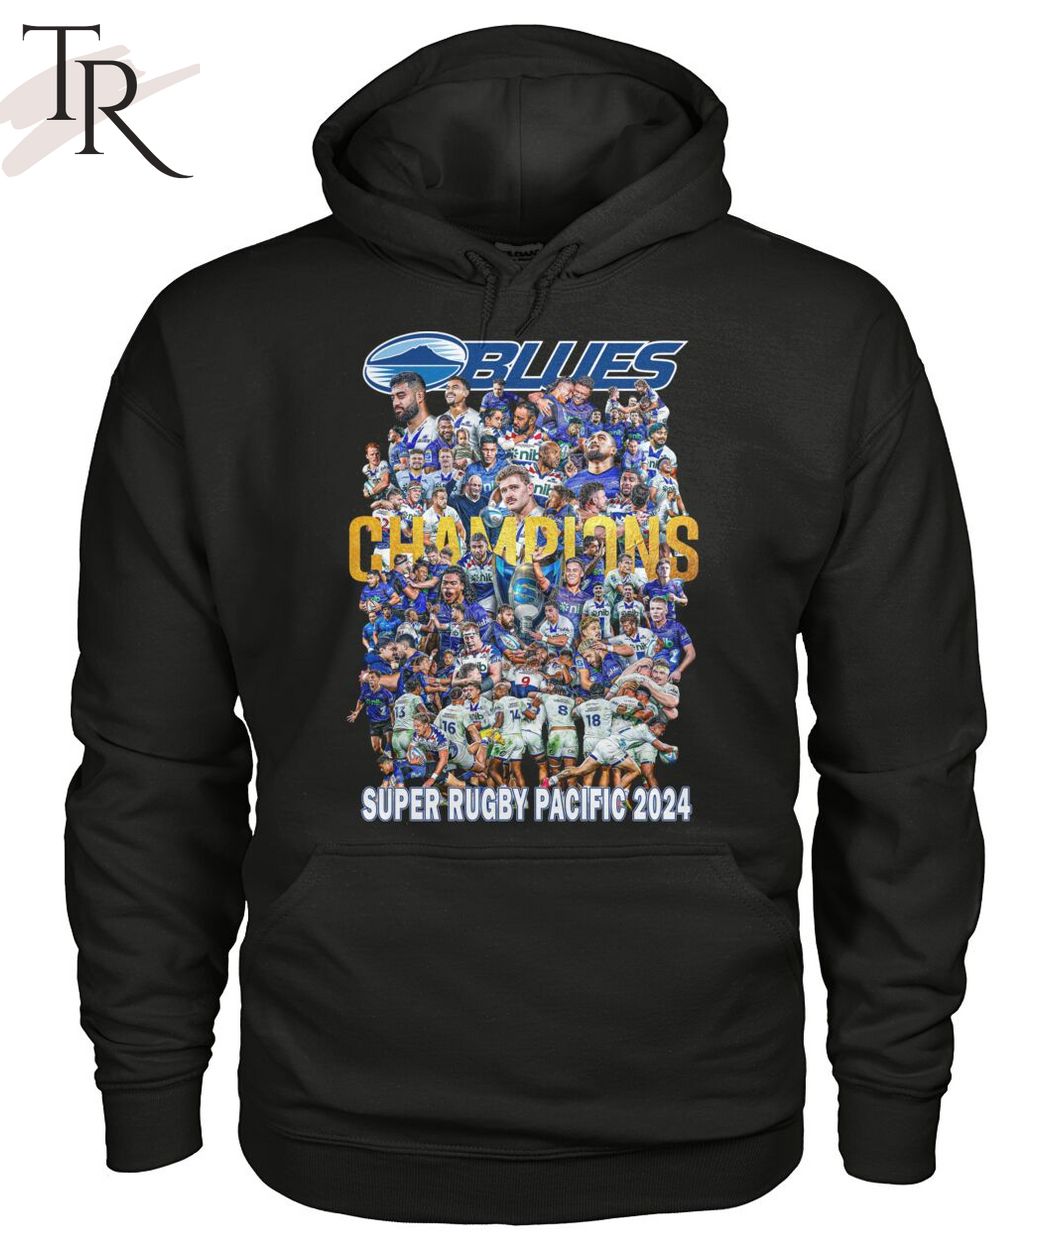 The Blues Super Rugby Pacific 2024 Champions T-Shirt